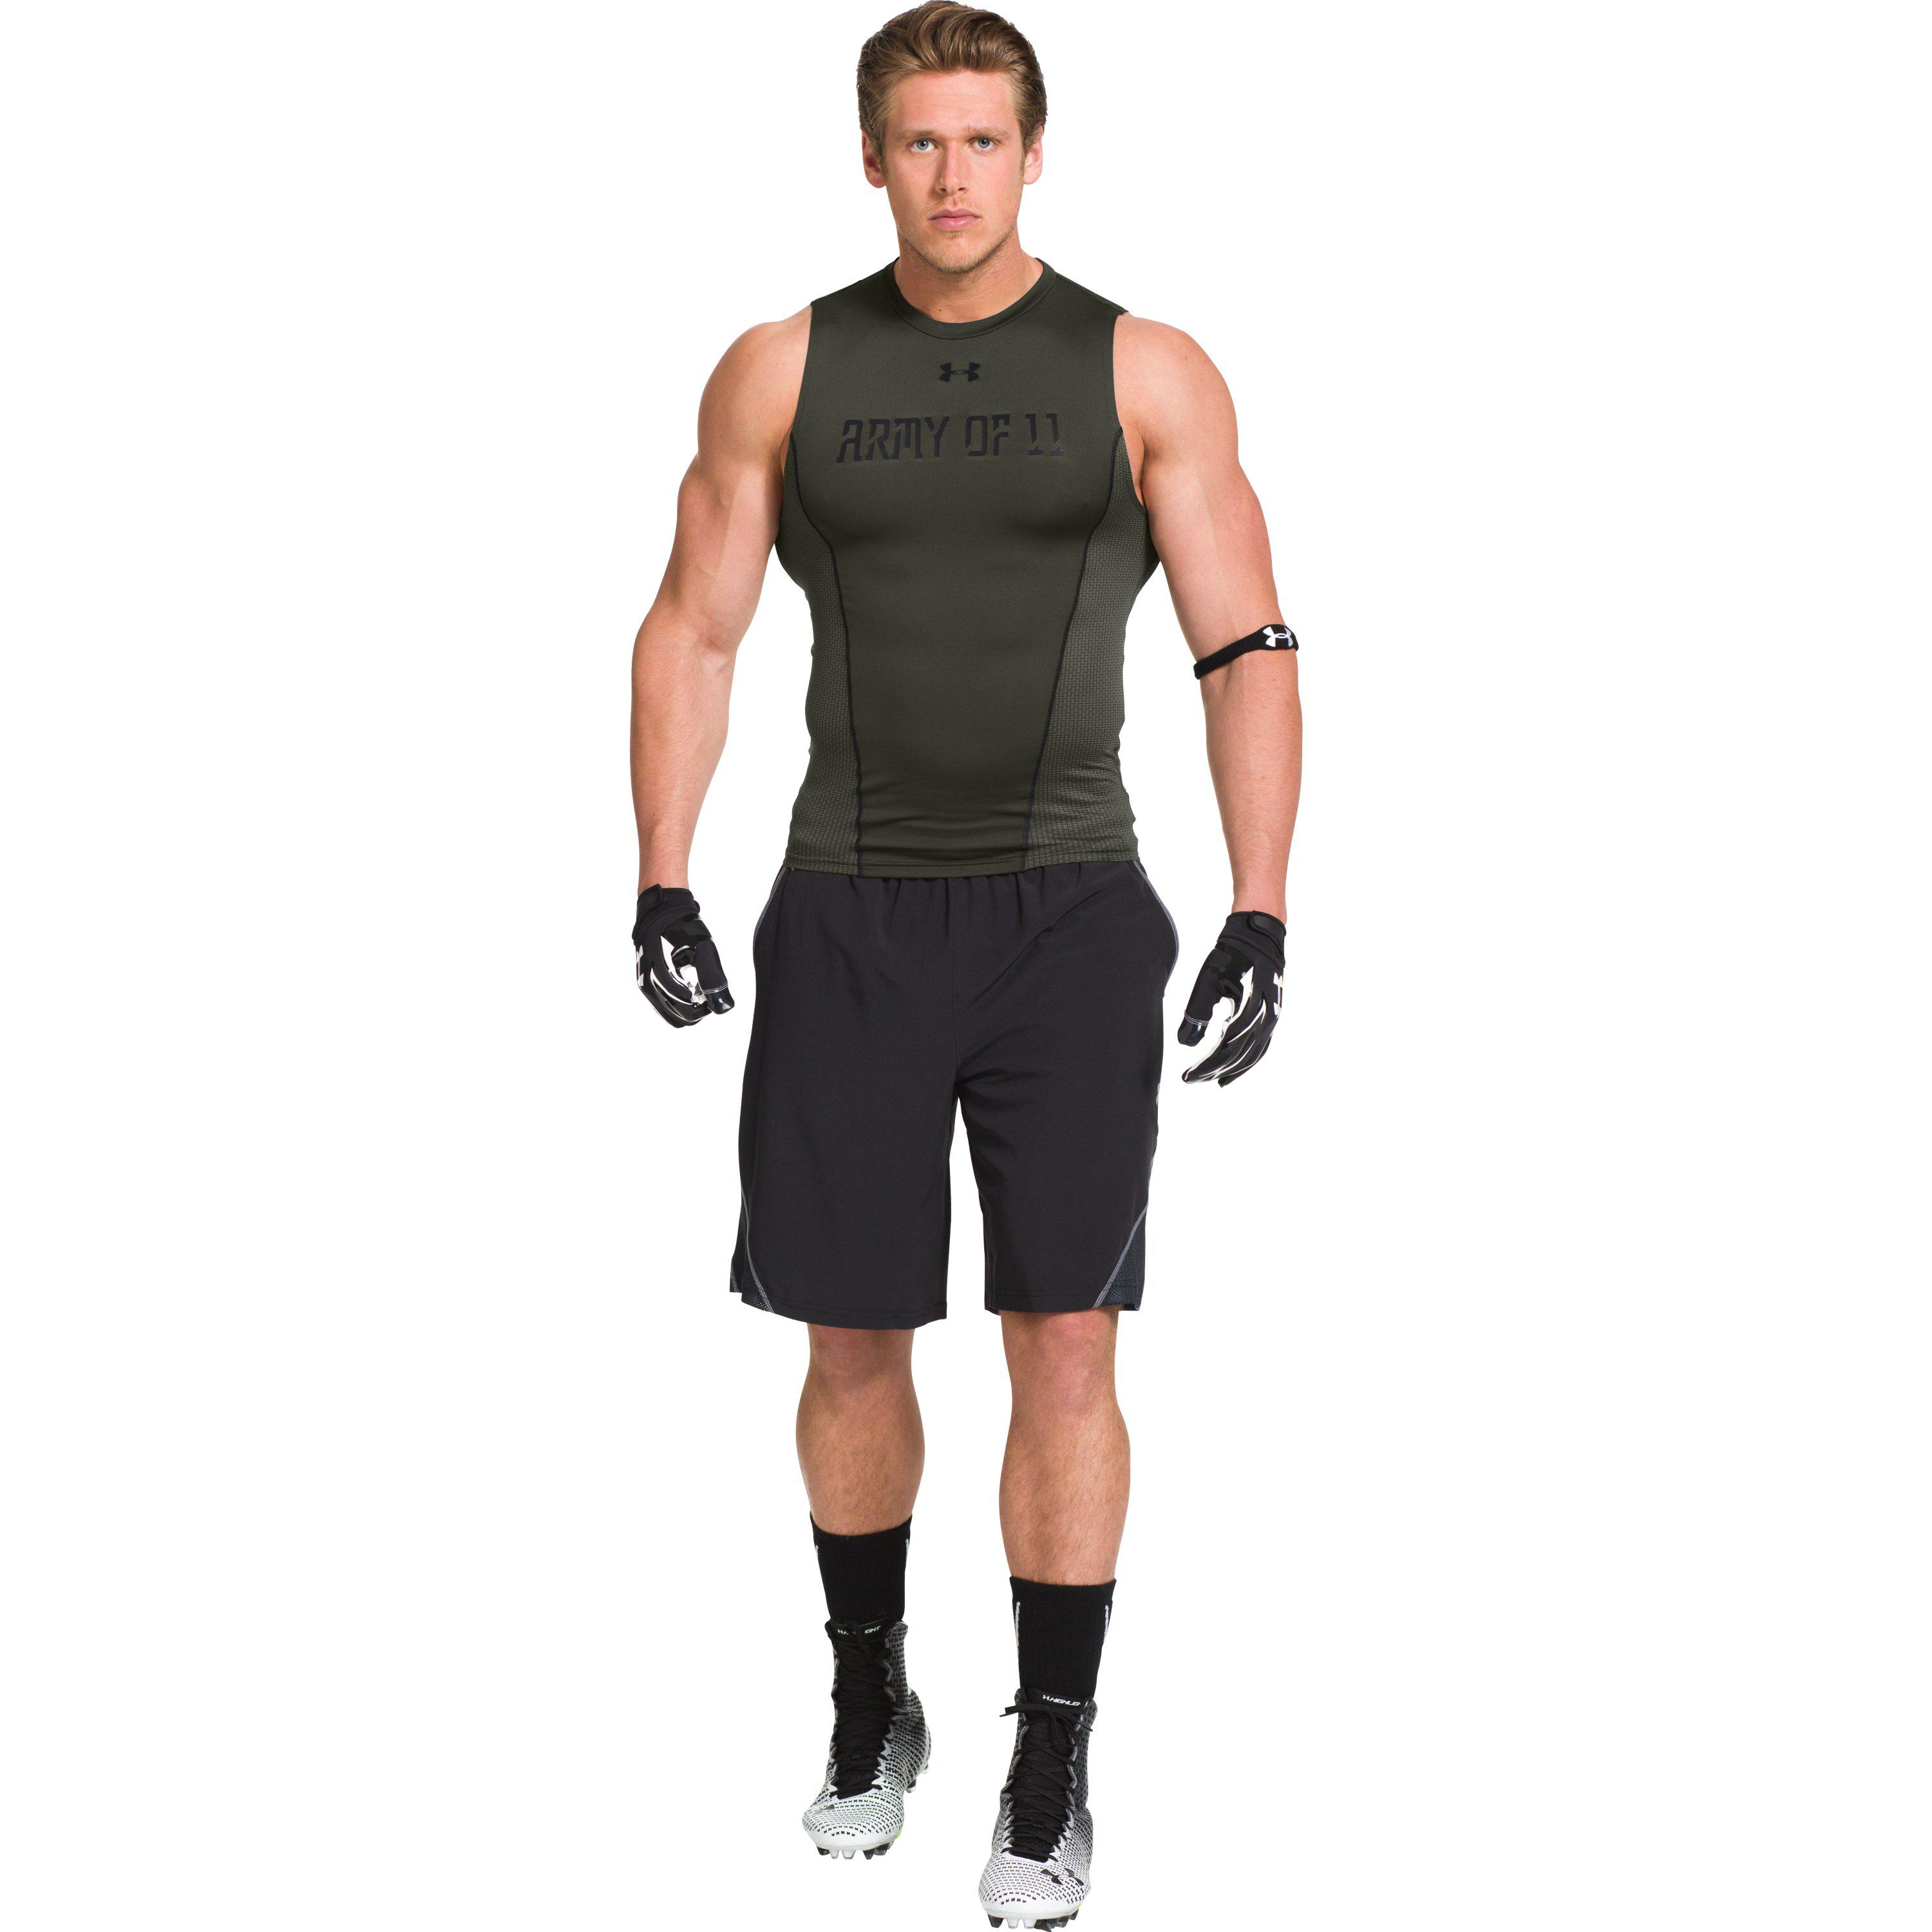 Under Armour Men's Ua Army Of 11 Football Sleeveless Compression Shirt in  Green for Men